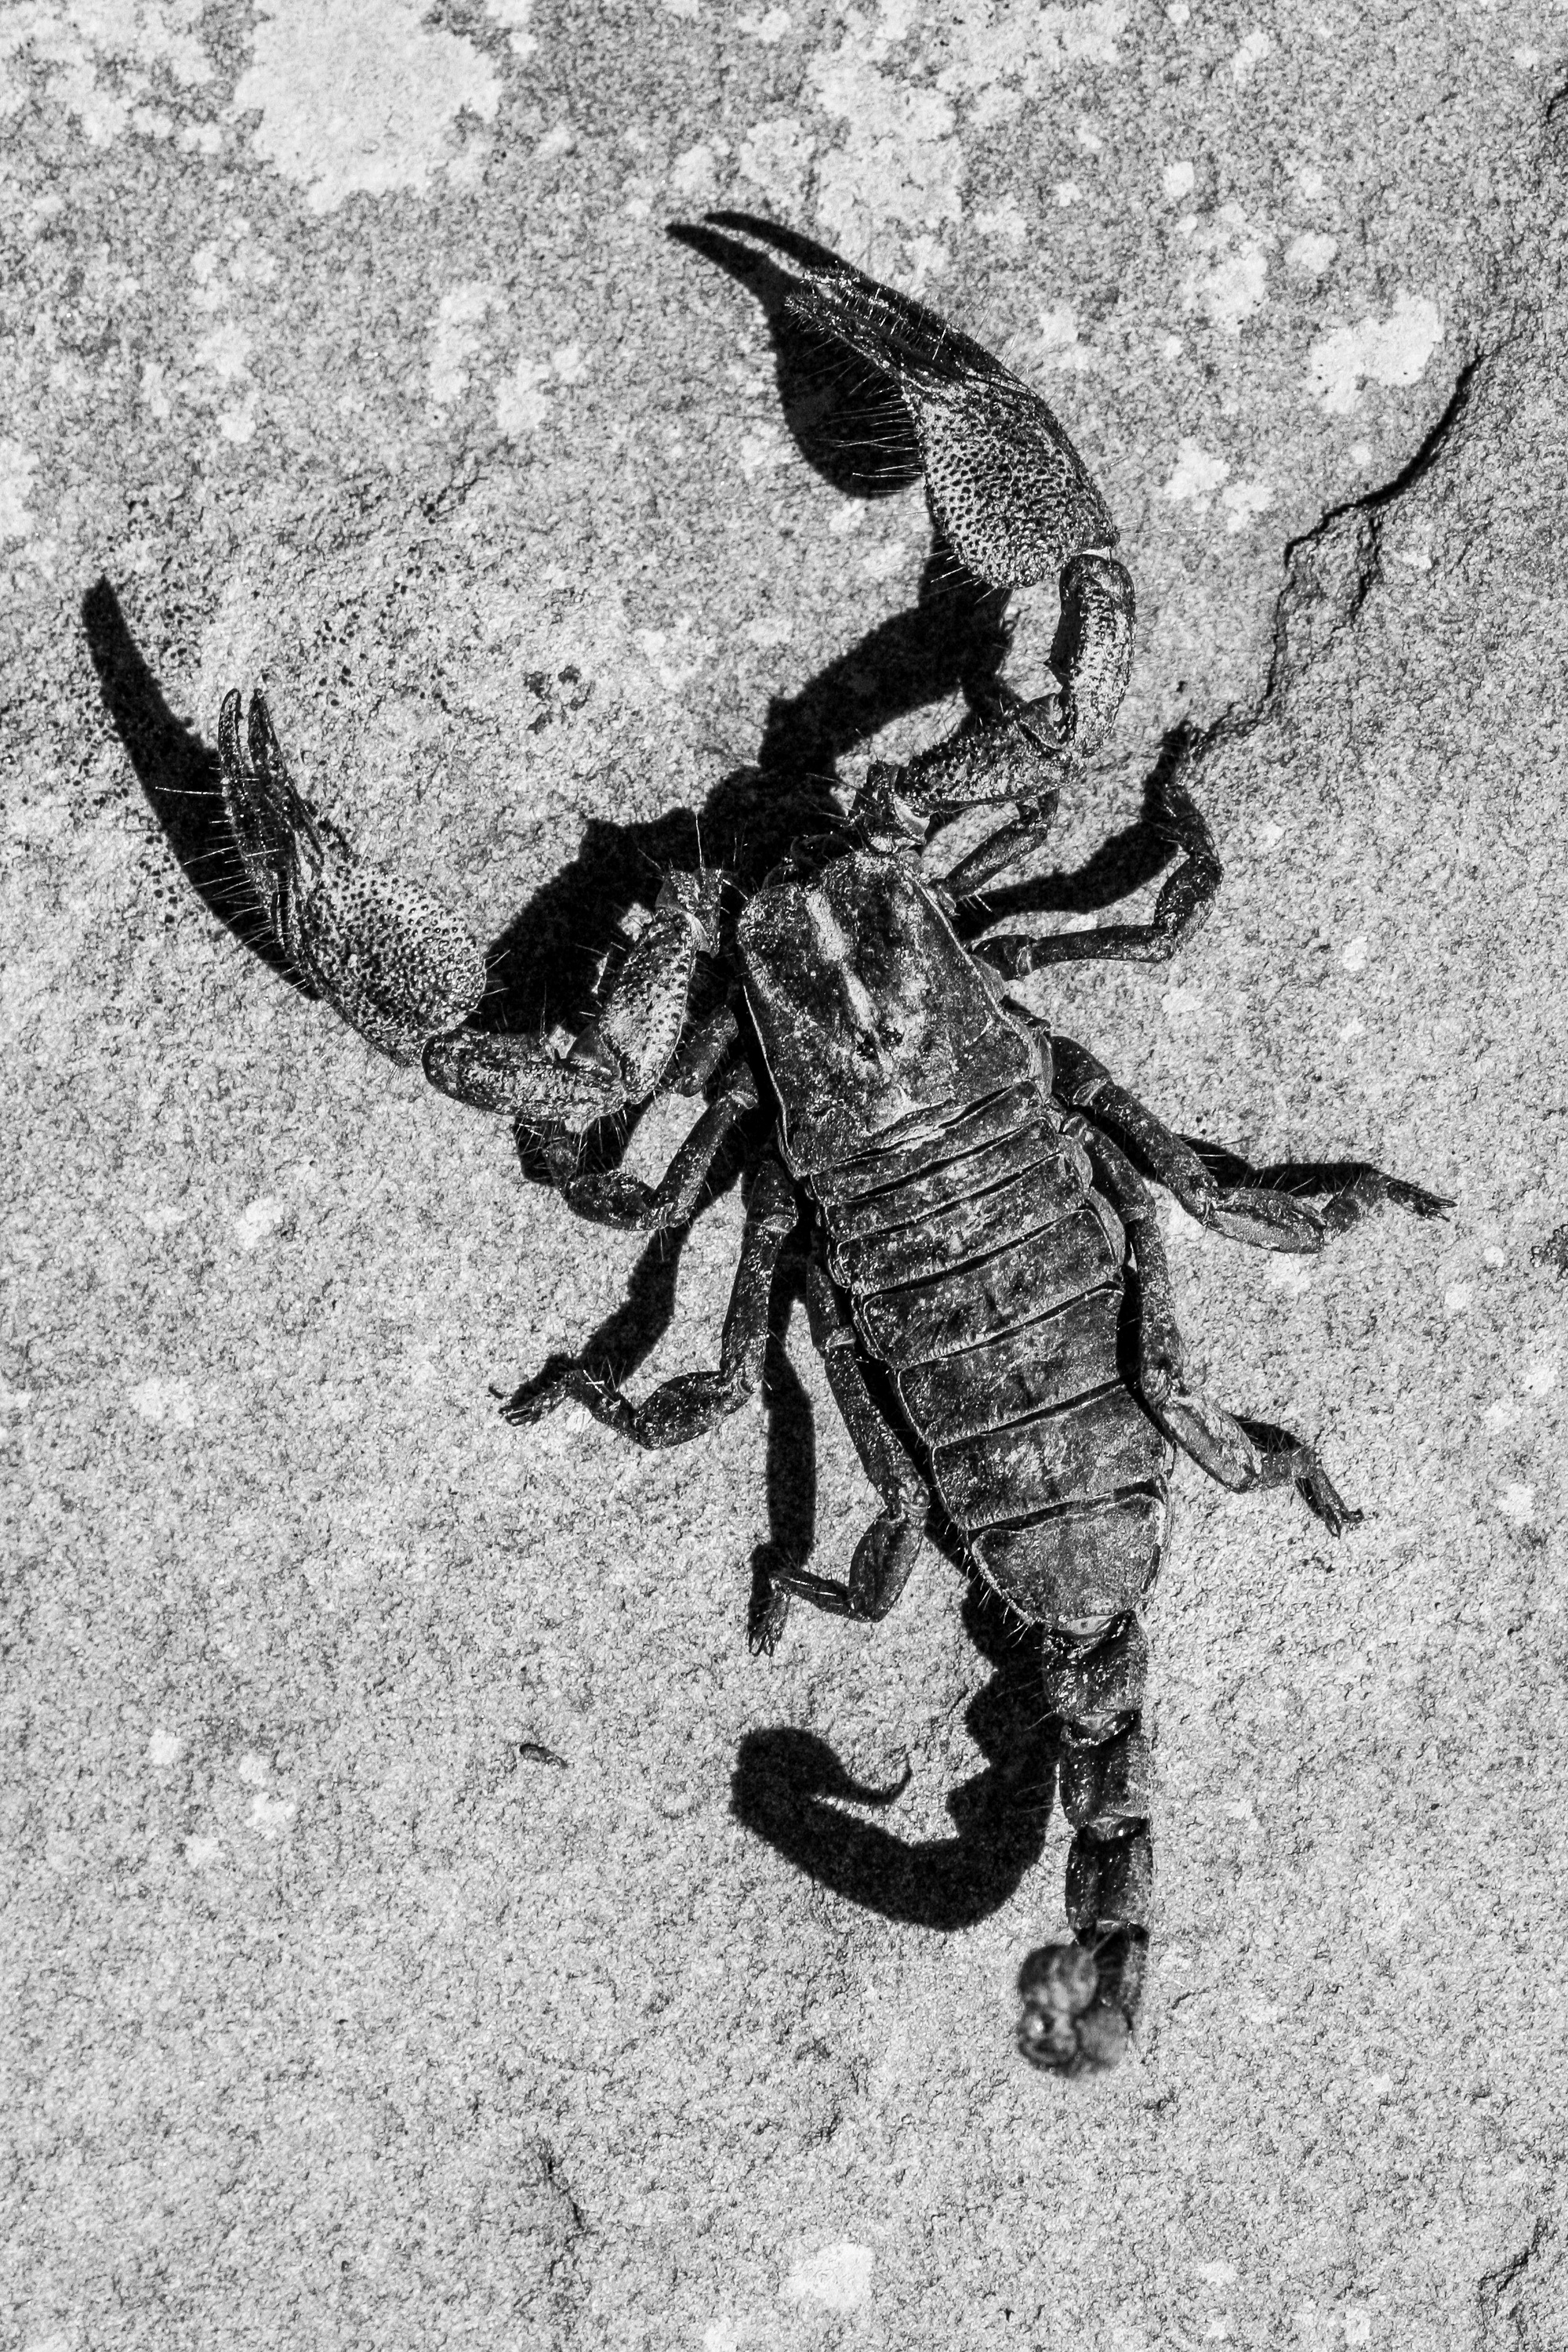 There are always creepy-crawlies – and some are dangerous, like this scorpion. Shake out your shoes and slippers before donning them. Image: Chris Marais